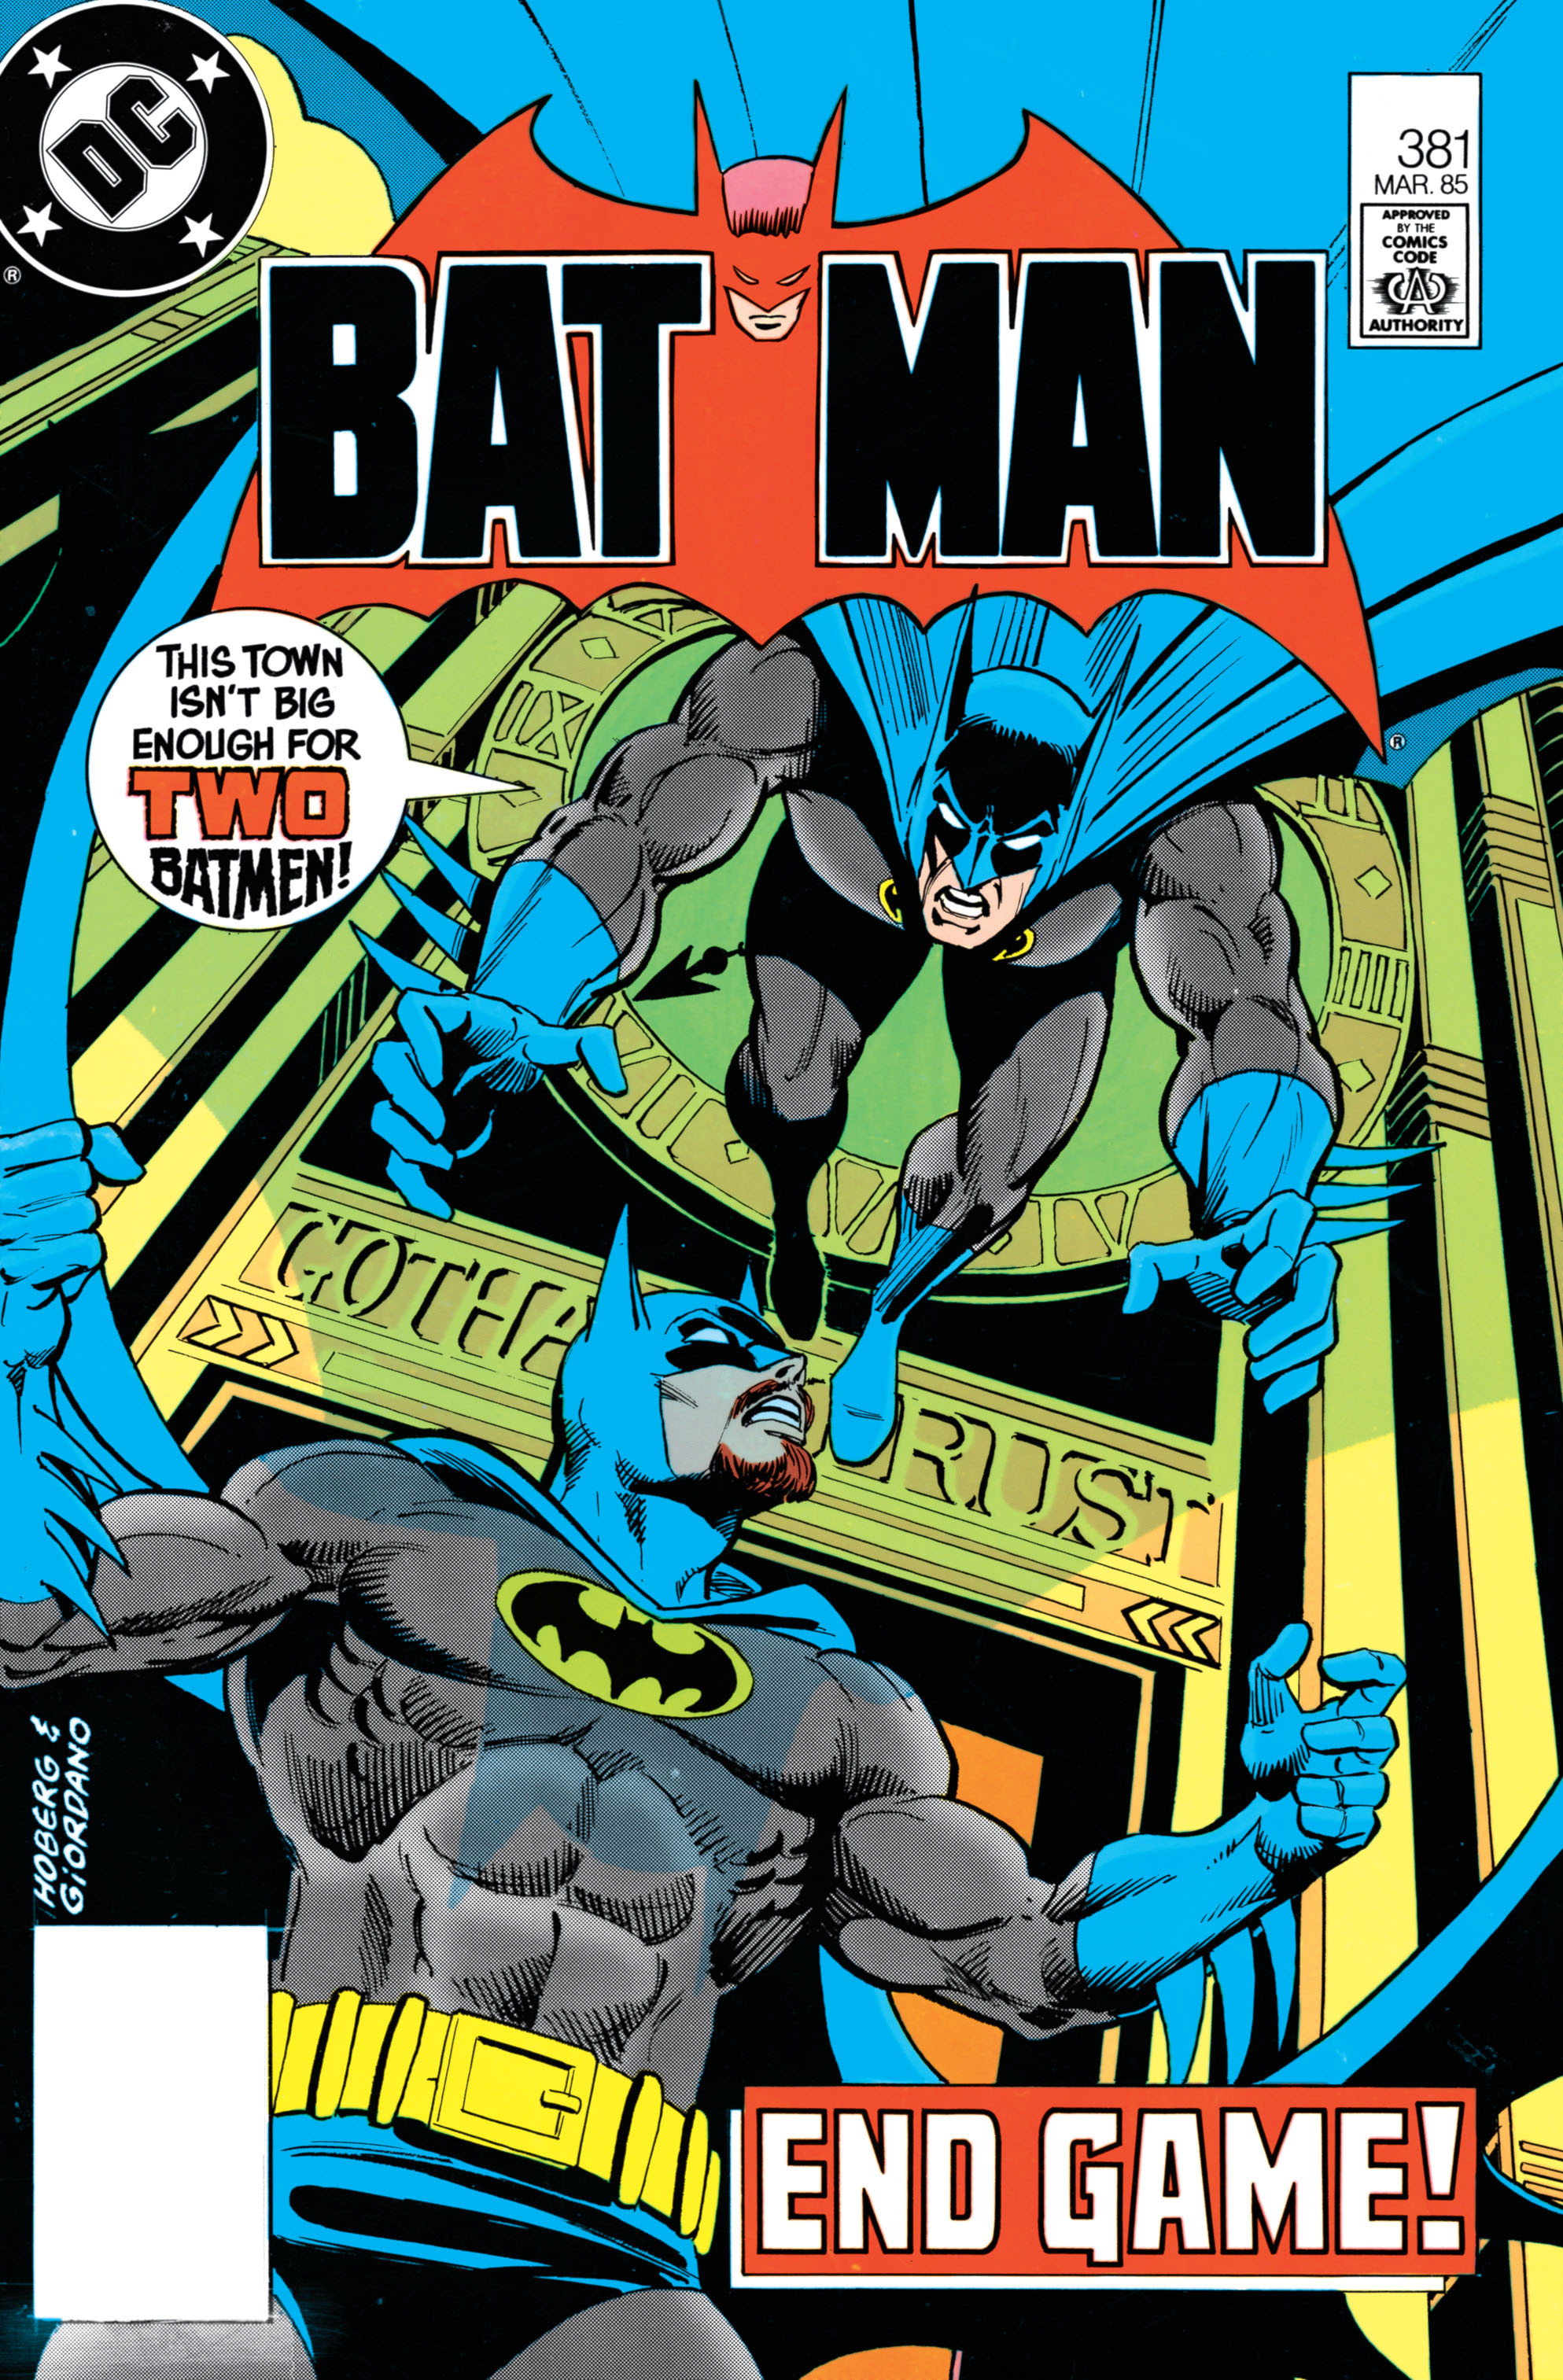 Batman 1940 Issue 381 | Read Batman 1940 Issue 381 comic online in high  quality. Read Full Comic online for free - Read comics online in high  quality .|